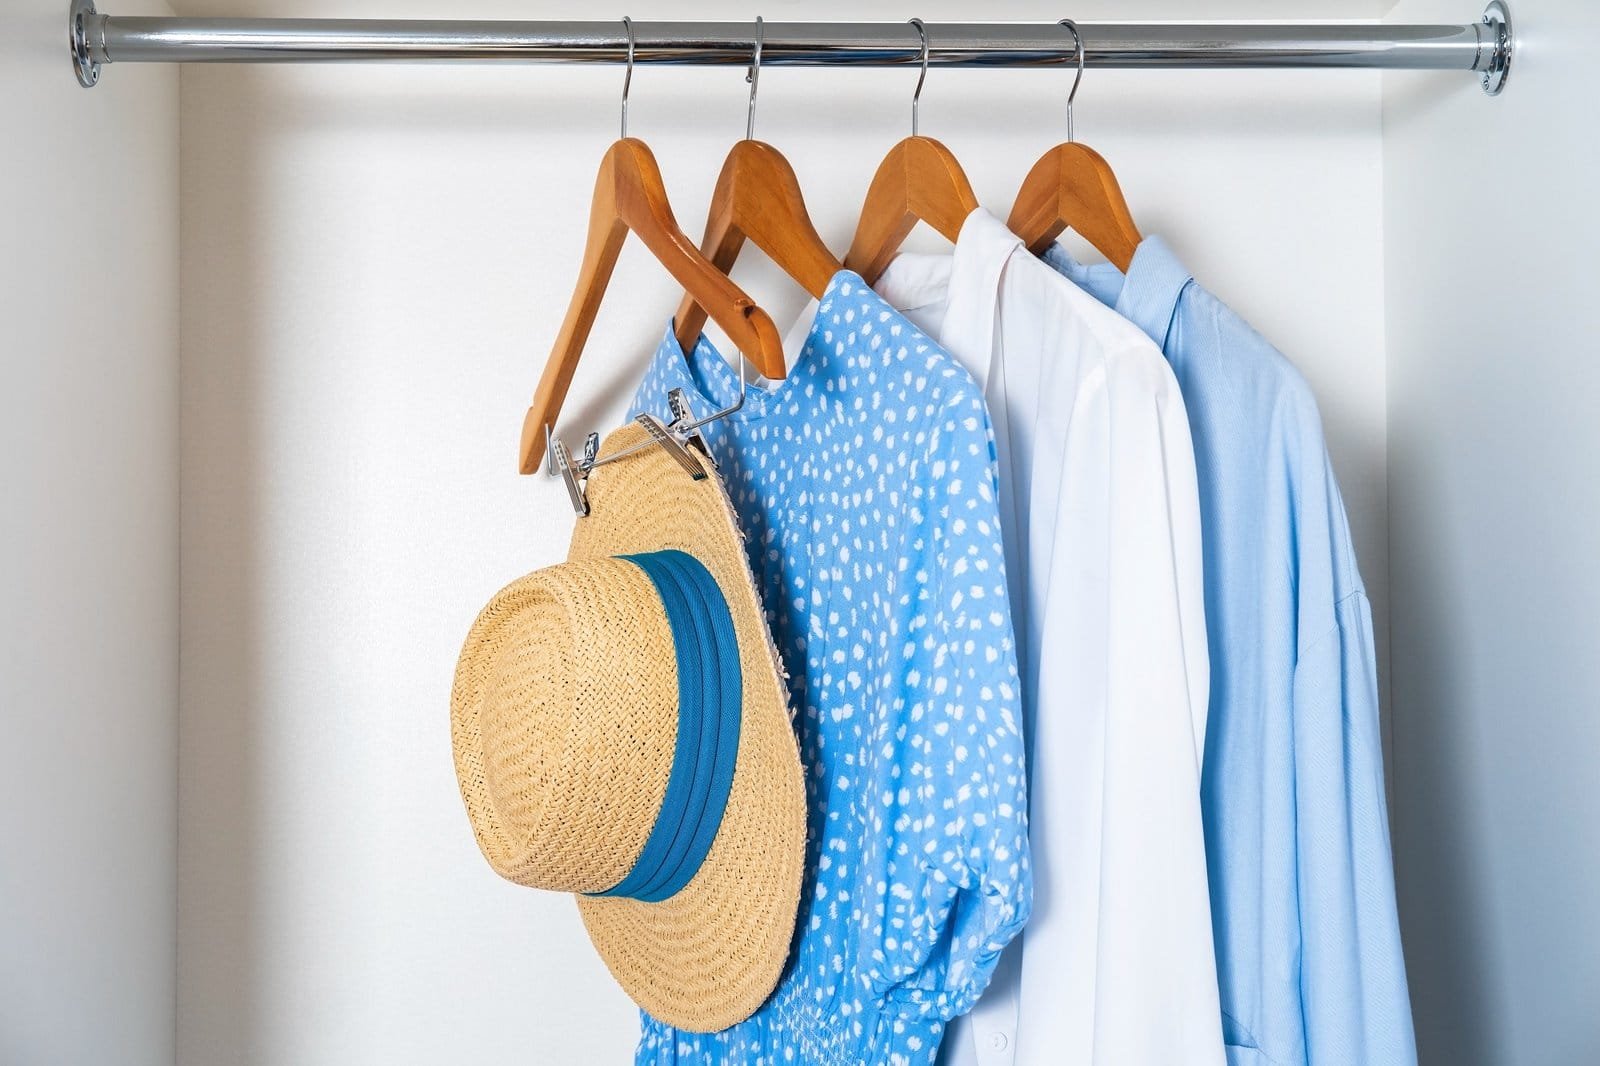 Professional organizer arranges clothes and a hat on a hanger in a closet.